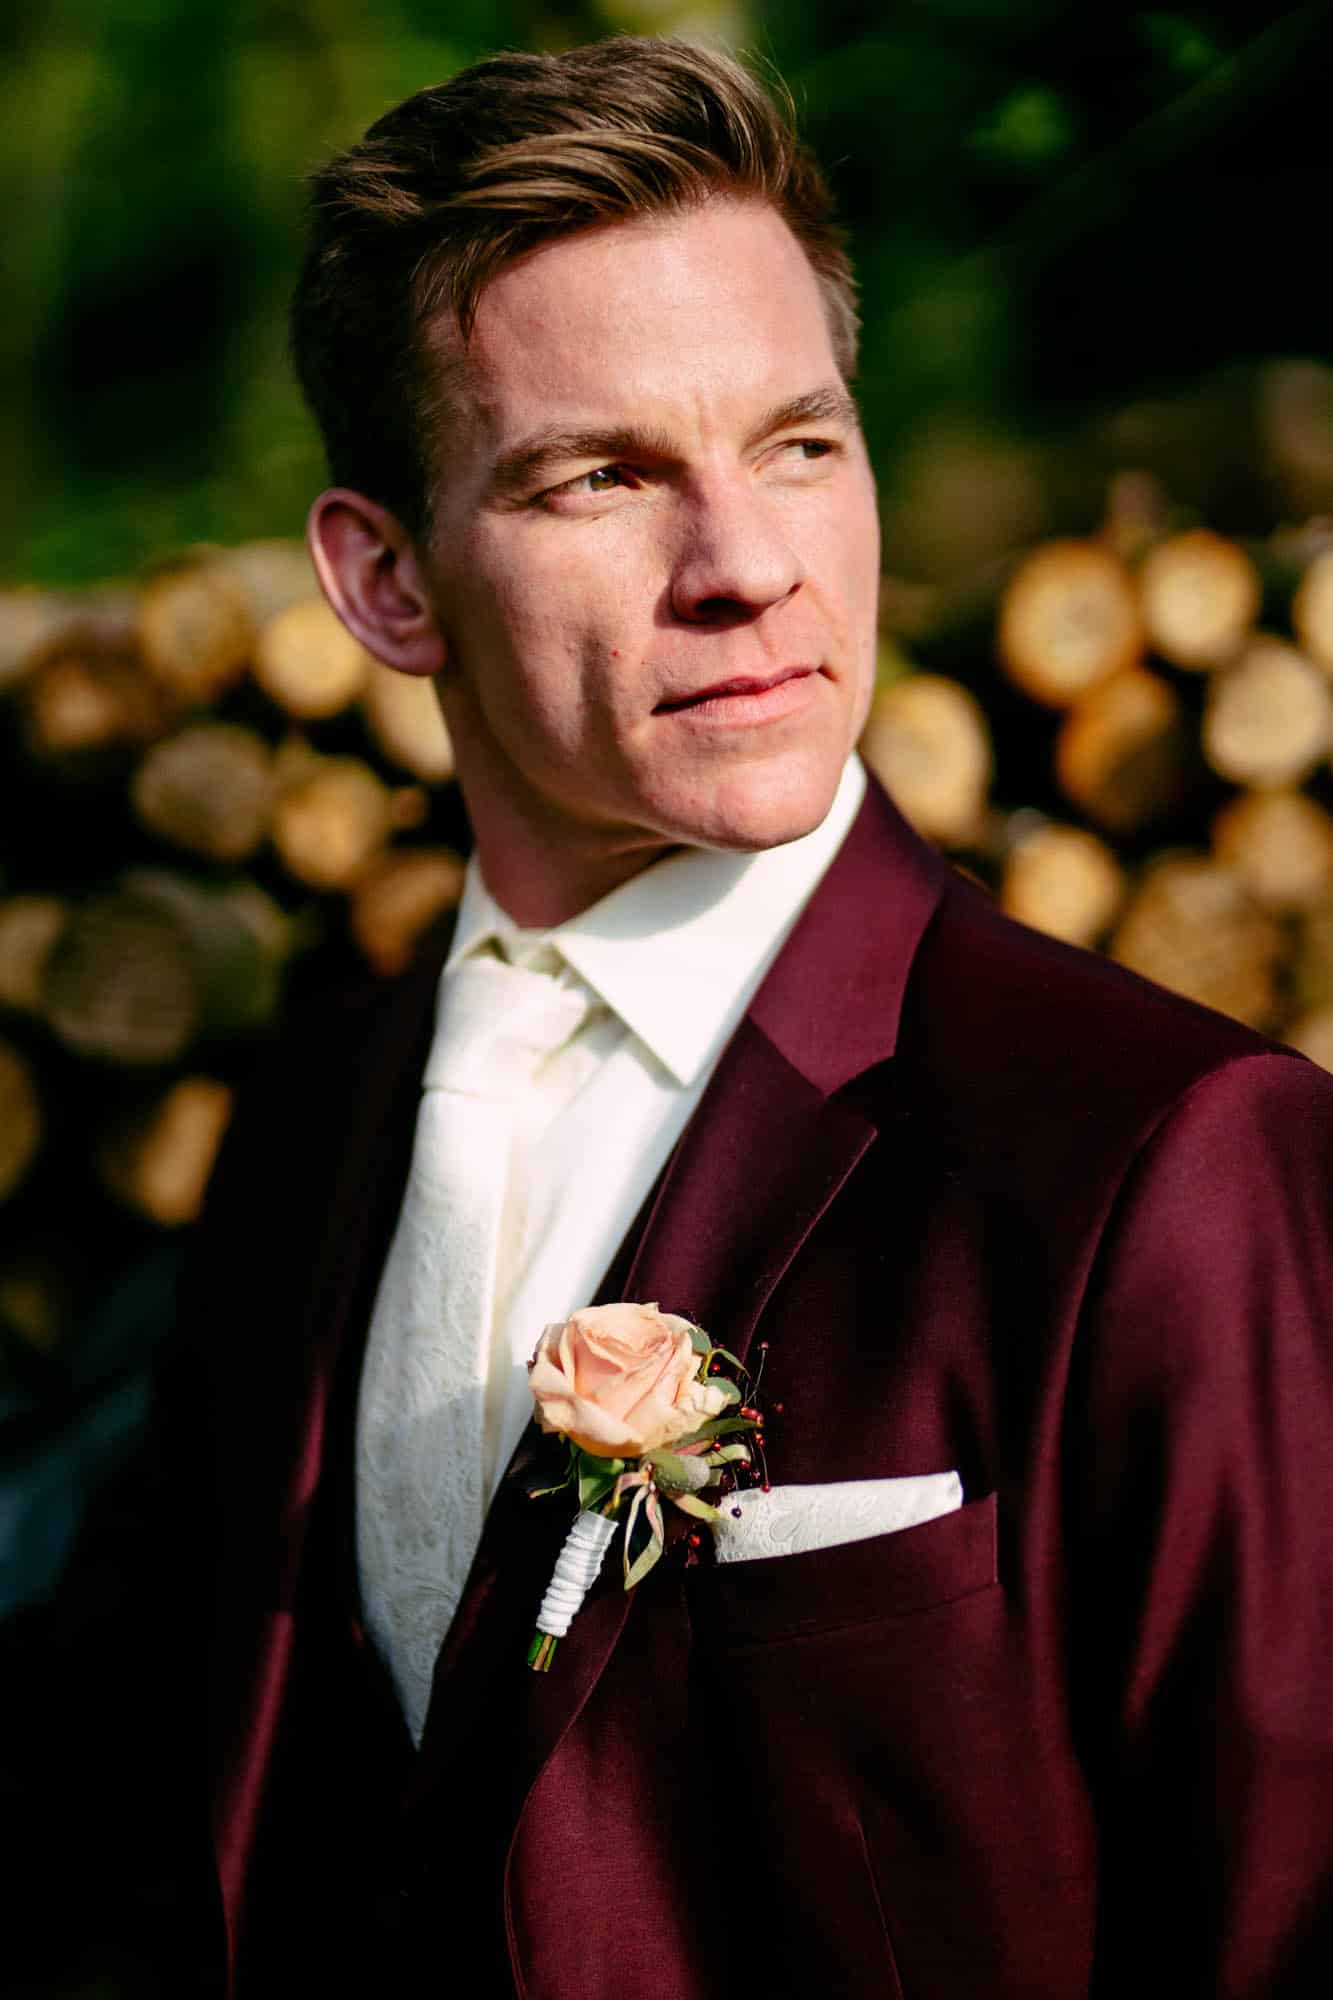 A man in a burgundy suit stands in front of tree trunks.